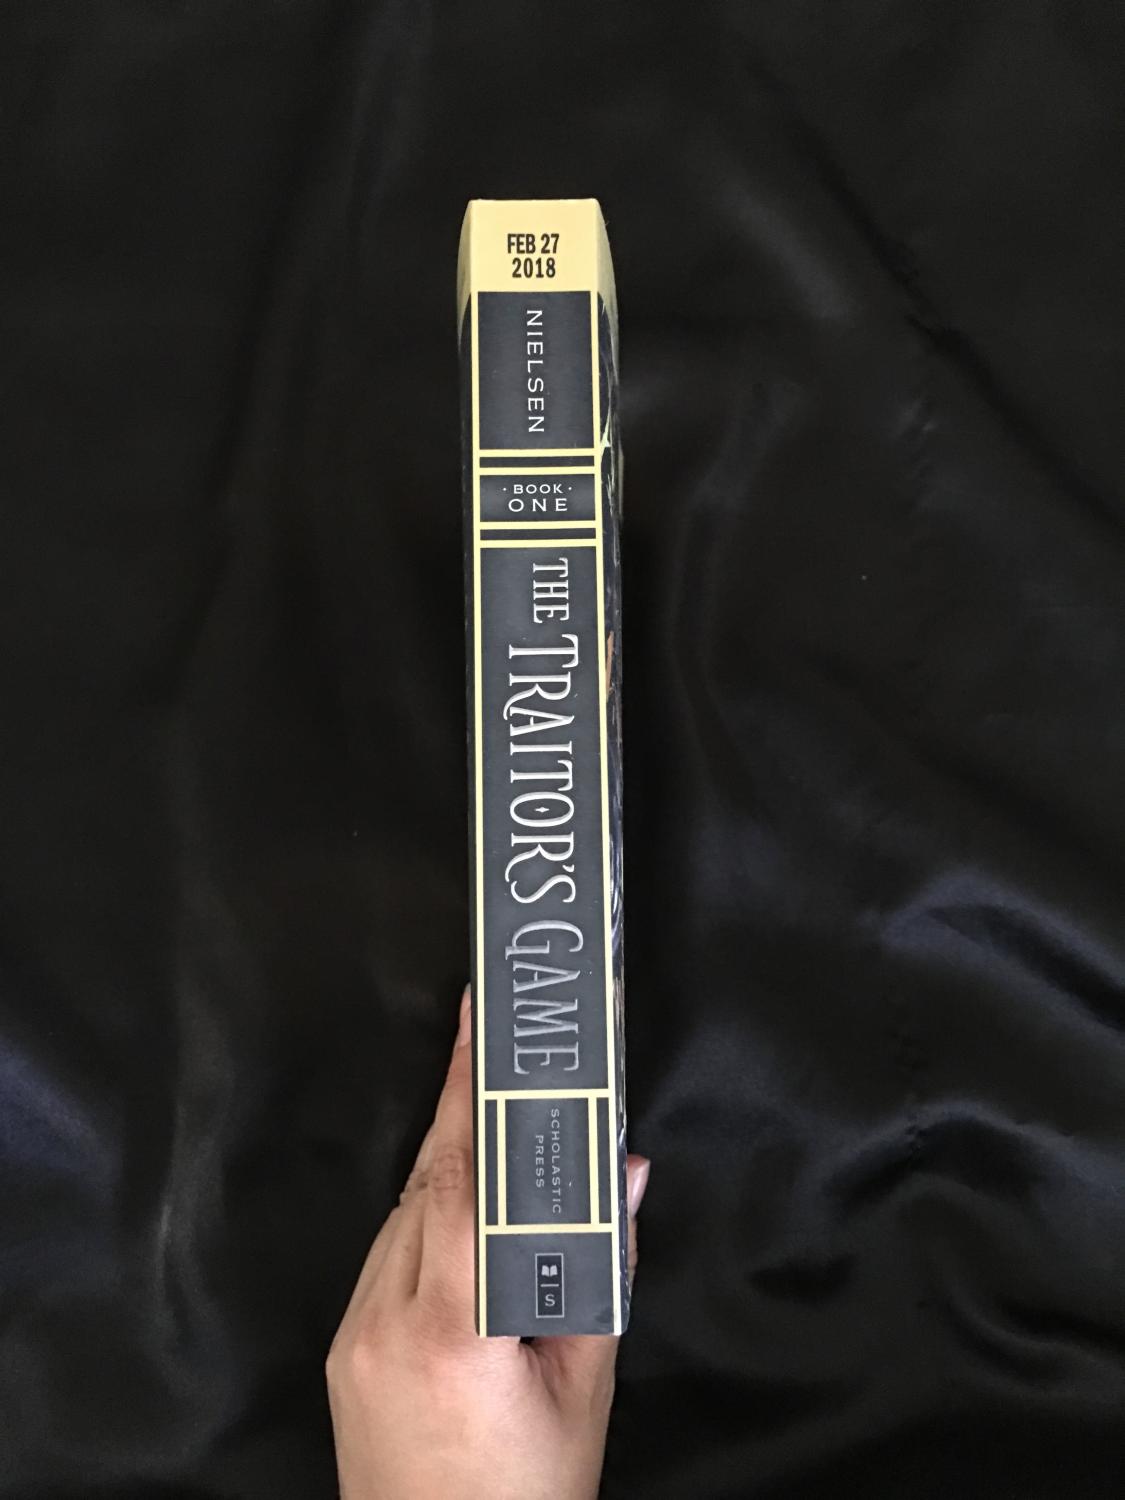 The Traitor's Game (The Traitor's by Nielsen, Jennifer A.